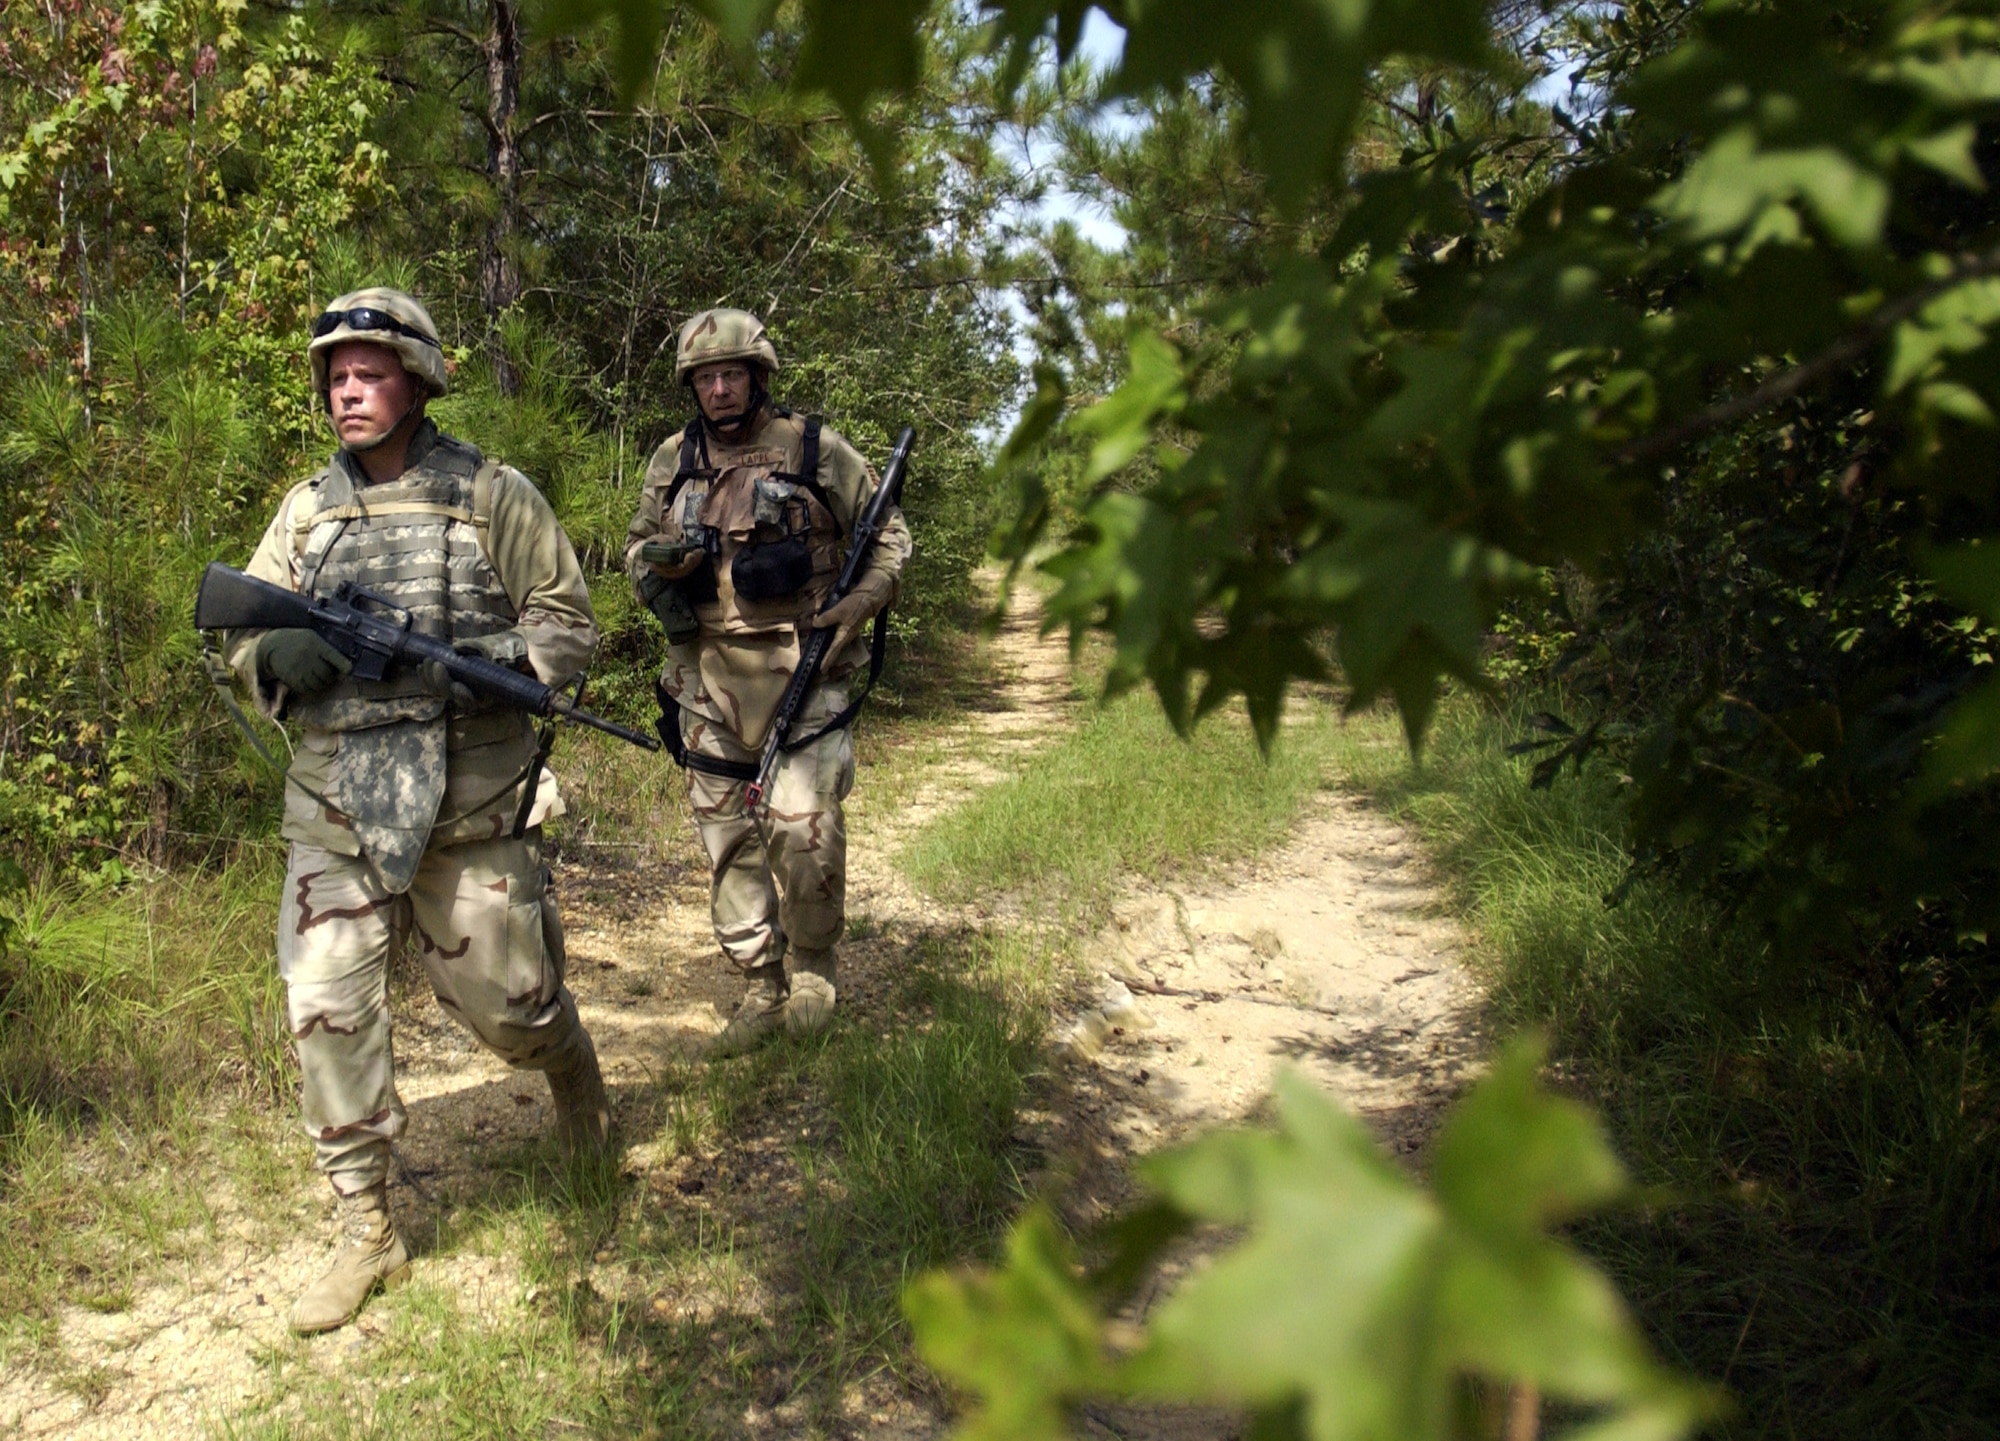 Capt. Michael Schroeder (front) and Tech. Sgt. Gene Lappe search for a land navigation point and improvised explosive devices Aug. 30 using techniques learned at Camp Shelby, Miss.  Camp Shelby is one of several Army installations providing training to military personnel preparing to deploy to Southwest Asia.  (U.S. Air Force photo/Tech. Sgt. Cecilio Ricardo Jr.)

